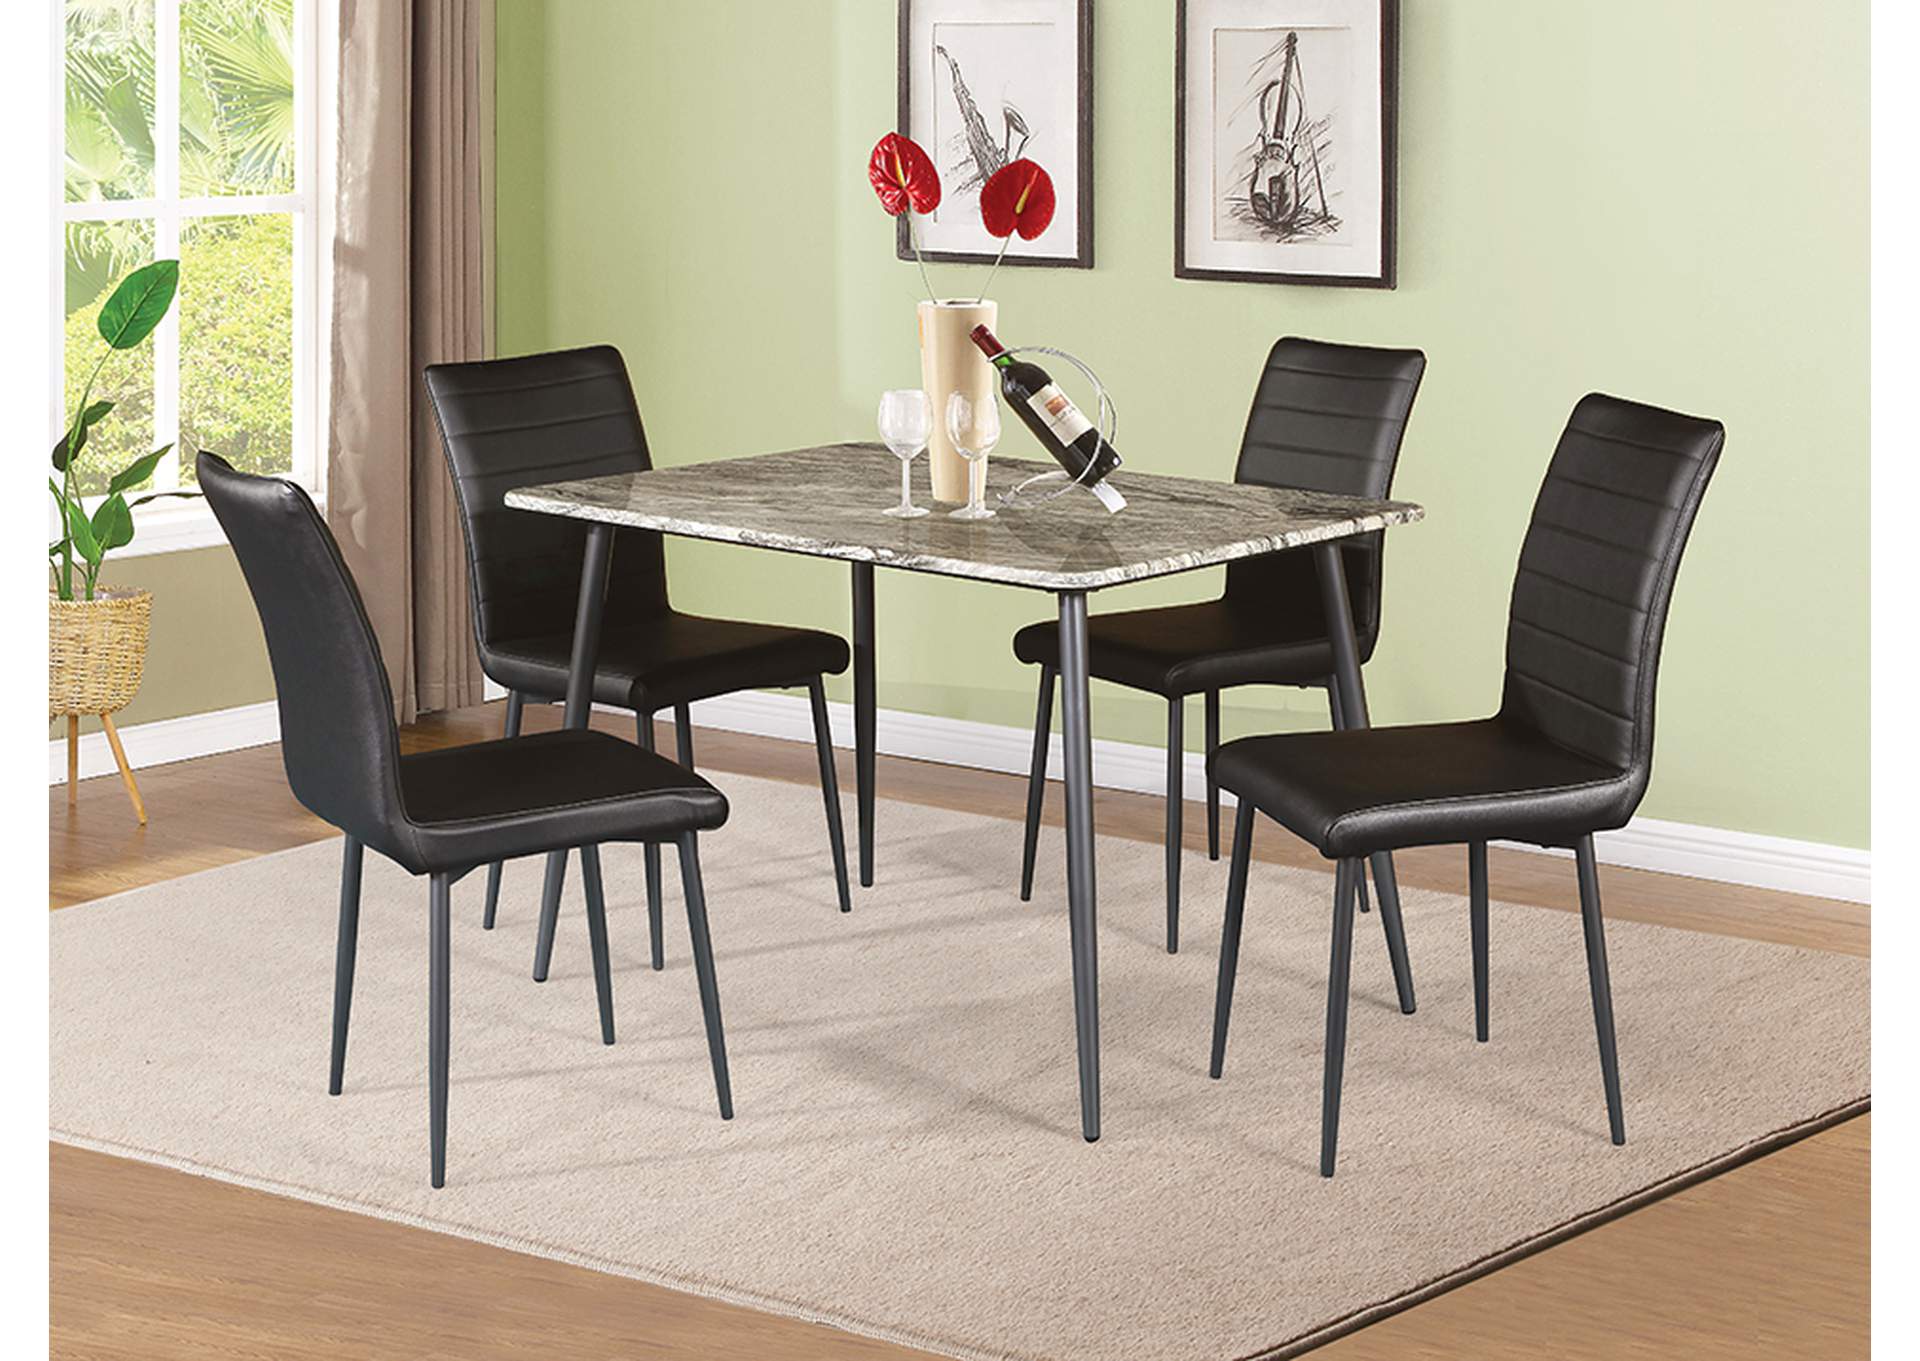 Nagel 48X30 Dining Table,Mainline